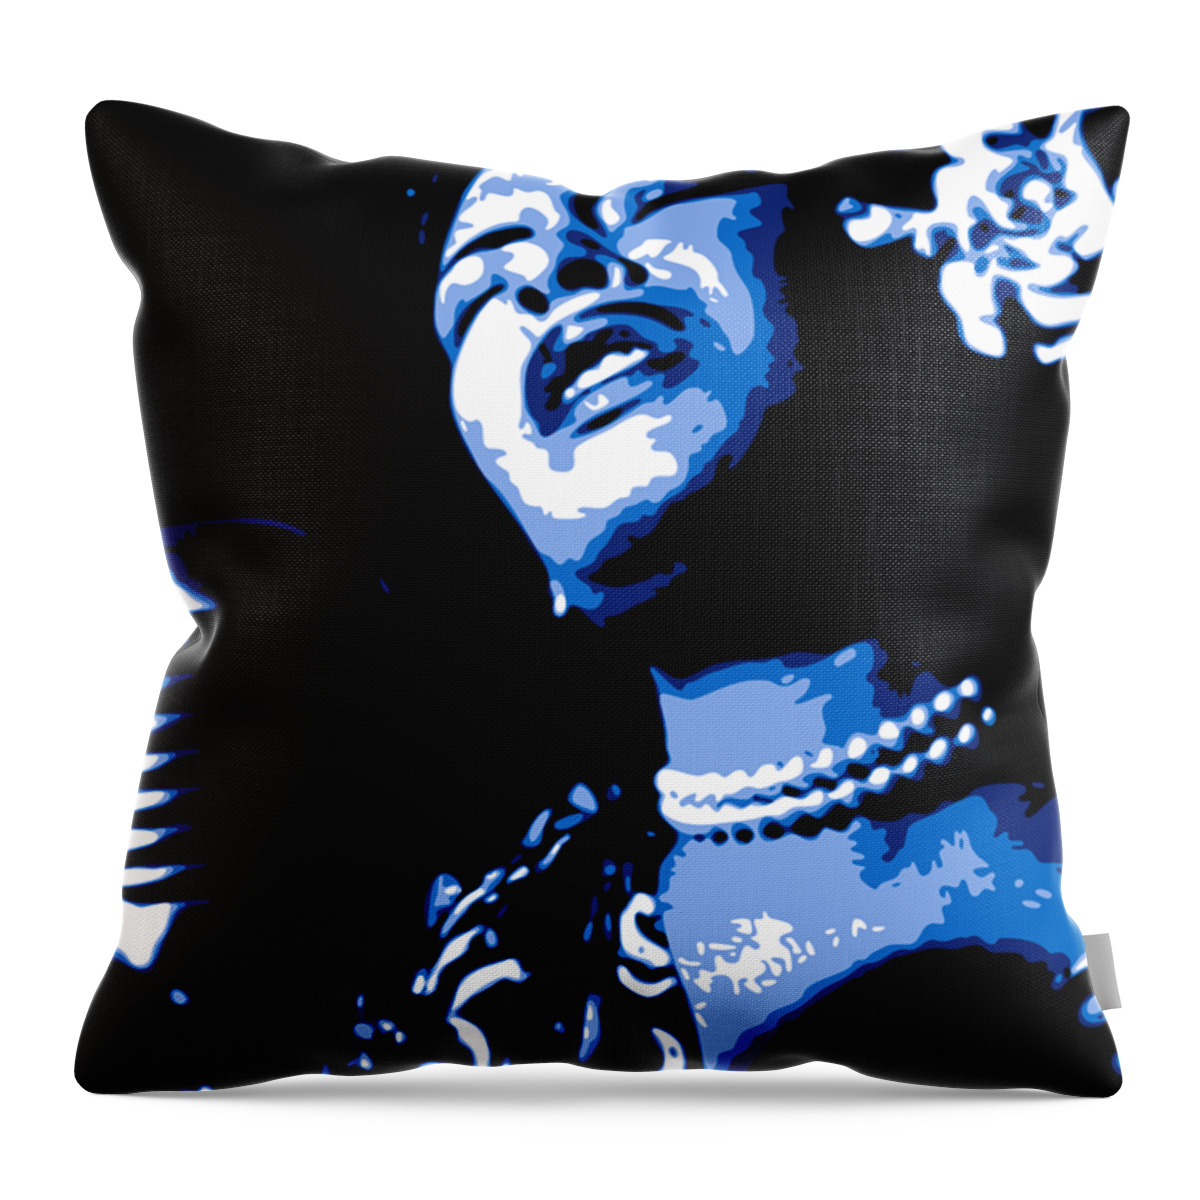 Billie Holiday Throw Pillow featuring the digital art Billie Holiday by DB Artist